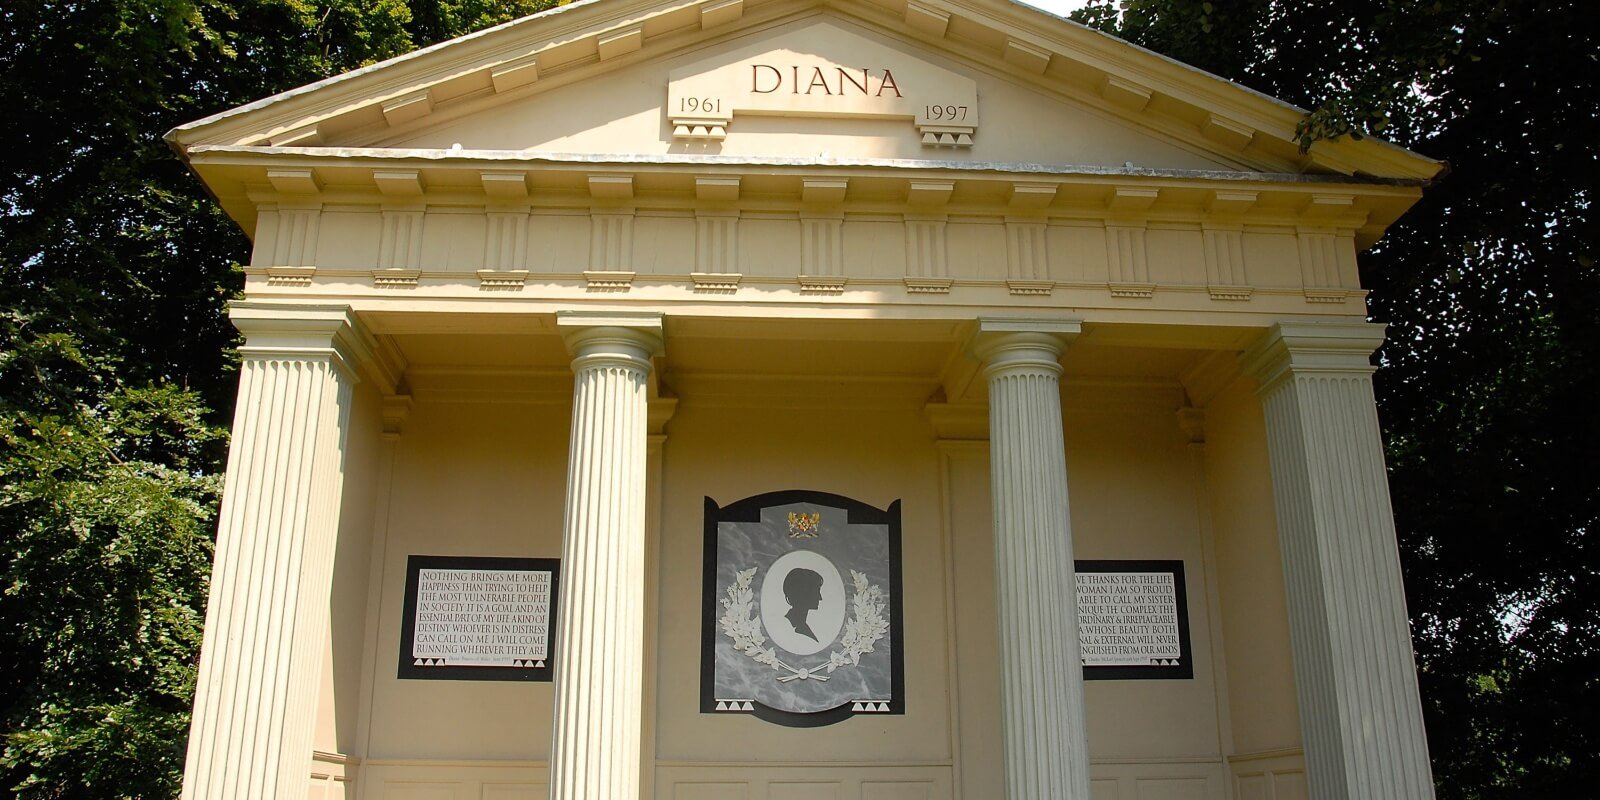 Princess Diana's grave on the grounds of Althorp House at the Spencer family ancestral home.